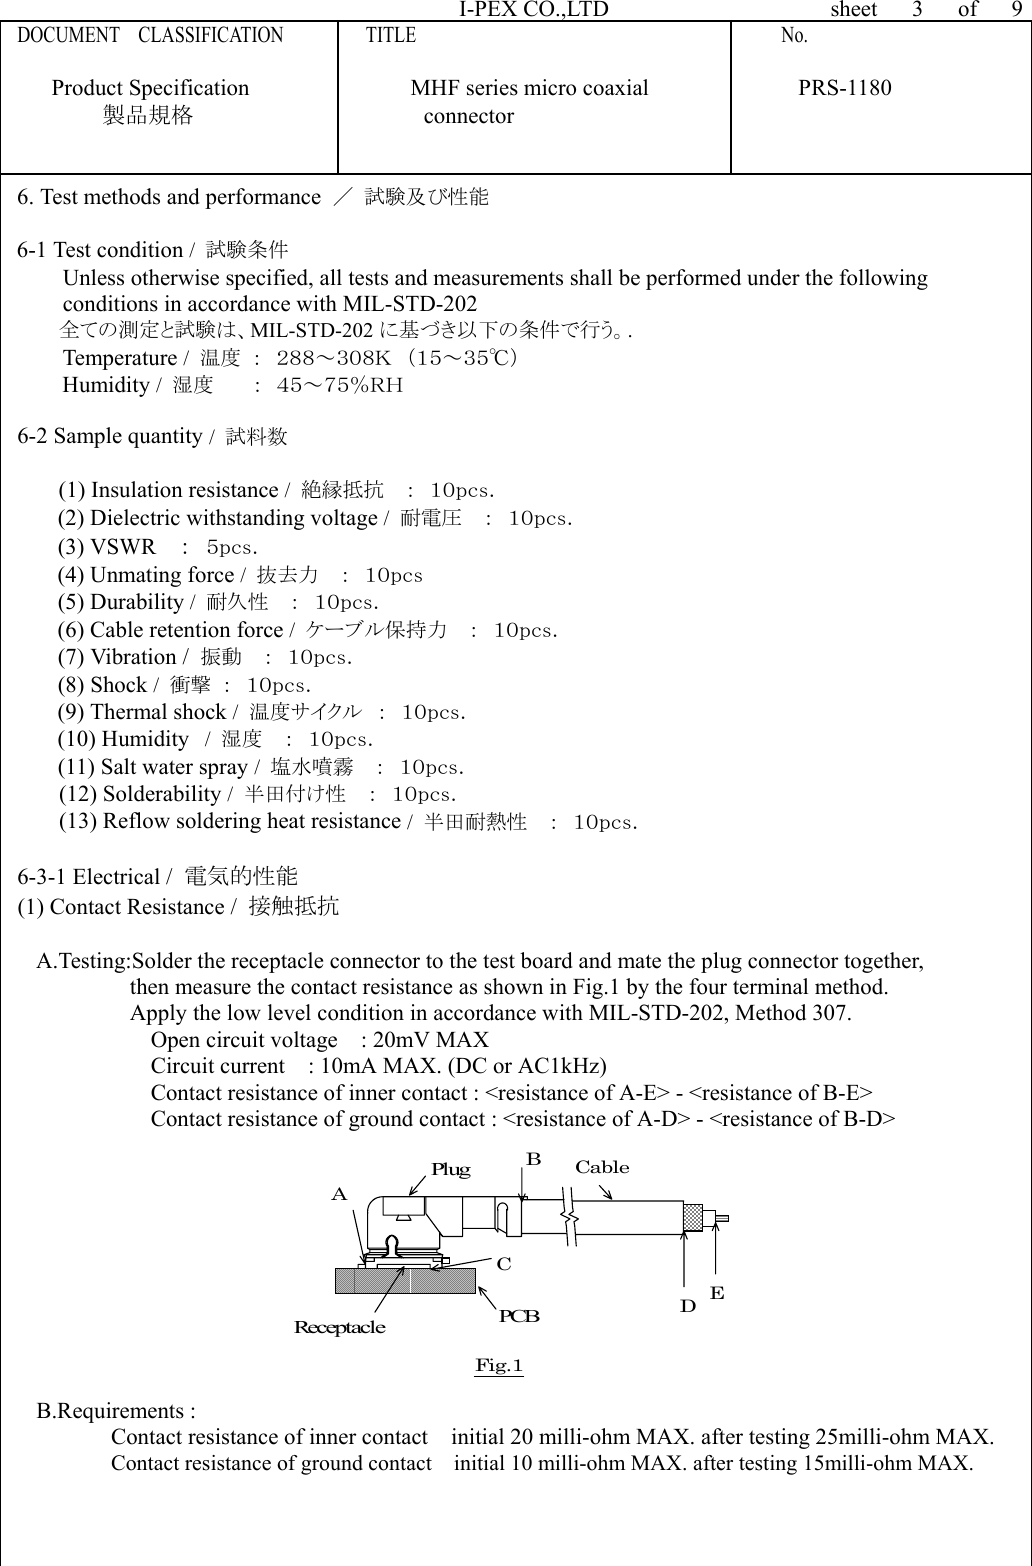 I-PEX CO.,LTD                sheet   3   of   9 DOCUMENT  CLASSIFICATION         TITLE                                        No.      Product Specification              MHF series micro coaxial             PRS-1180 製品規格                    connector   6. Test methods and performance  ／ 試験及び性能   6-1 Test condition /  試験条件  Unless otherwise specified, all tests and measurements shall be performed under the following   conditions in accordance with MIL-STD-202  全ての測定と試験は、MIL-STD-202 に基づき以下の条件で行う。.  Temperature /  温度 ：  ２８８～３０８Ｋ  （１５～３５℃） Humidity /  湿度     ：  ４５～７５％ＲＨ  6-2 Sample quantity /  試料数  (1) Insulation resistance /  絶縁抵抗  ：  １０ｐｃｓ． (2) Dielectric withstanding voltage /  耐電圧  ：  １０ｐｃｓ． (3) VSWR    ：  ５ｐｃｓ． (4) Unmating force /  抜去力  ：  １０ｐｃｓ (5) Durability /  耐久性  ：  １０ｐｃｓ． (6) Cable retention force /  ケーブル保持力  ：  １０ｐｃｓ． (7) Vibration /  振動  ：  １０ｐｃｓ． (8) Shock /  衝撃 ：  １０ｐｃｓ． (9) Thermal shock /  温度サイクル  ：  １０ｐｃｓ． (10) Humidity /  湿度  ：  １０ｐｃｓ． (11) Salt water spray /  塩水噴霧  ：  １０ｐｃｓ． (12) Solderability /  半田付け性  ：  １０ｐｃｓ． (13) Reflow soldering heat resistance /  半田耐熱性  ：  １０ｐｃｓ．  6-3-1 Electrical /  電気的性能 (1) Contact Resistance /  接触抵抗  A.Testing:Solder the receptacle connector to the test board and mate the plug connector together,   then measure the contact resistance as shown in Fig.1 by the four terminal method. Apply the low level condition in accordance with MIL-STD-202, Method 307. Open circuit voltage    : 20mV MAX   Circuit current    : 10mA MAX. (DC or AC1kHz) Contact resistance of inner contact : &lt;resistance of A-E&gt; - &lt;resistance of B-E&gt; Contact resistance of ground contact : &lt;resistance of A-D&gt; - &lt;resistance of B-D&gt; PCBPlugReceptacleCableCABDEFig.1 B.Requirements :   Contact resistance of inner contact    initial 20 milli-ohm MAX. after testing 25milli-ohm MAX. Contact resistance of ground contact    initial 10 milli-ohm MAX. after testing 15milli-ohm MAX.      Form.Rev.0 